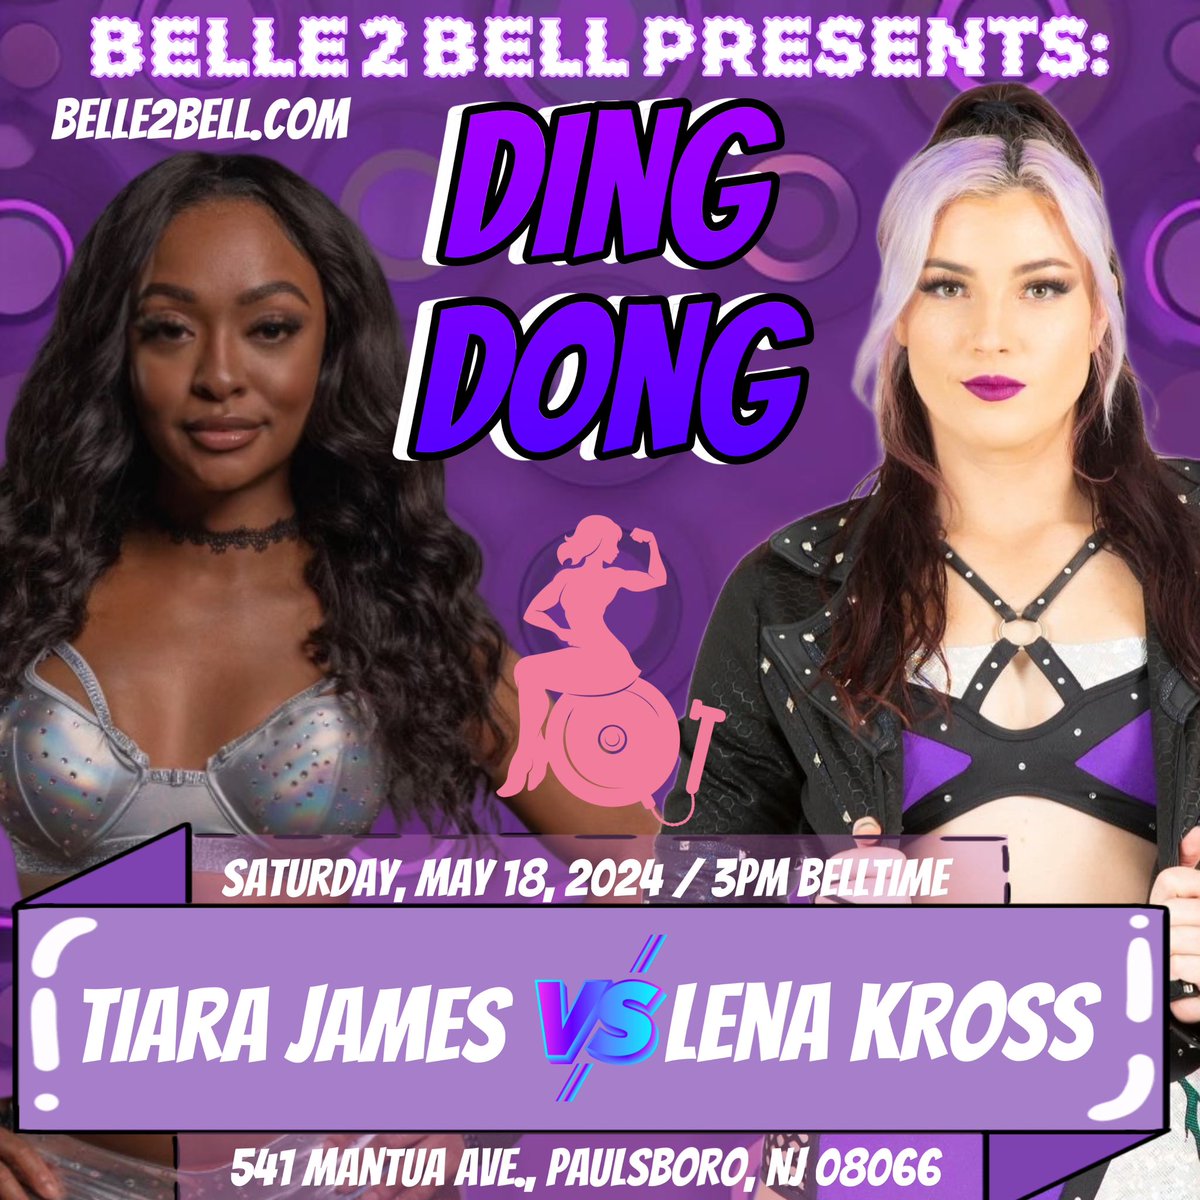 We are beyond excited to bring you Tiara James vs Lena Cross on May 18th at Ding Dong! Tickets available at Belle2Bell.com!